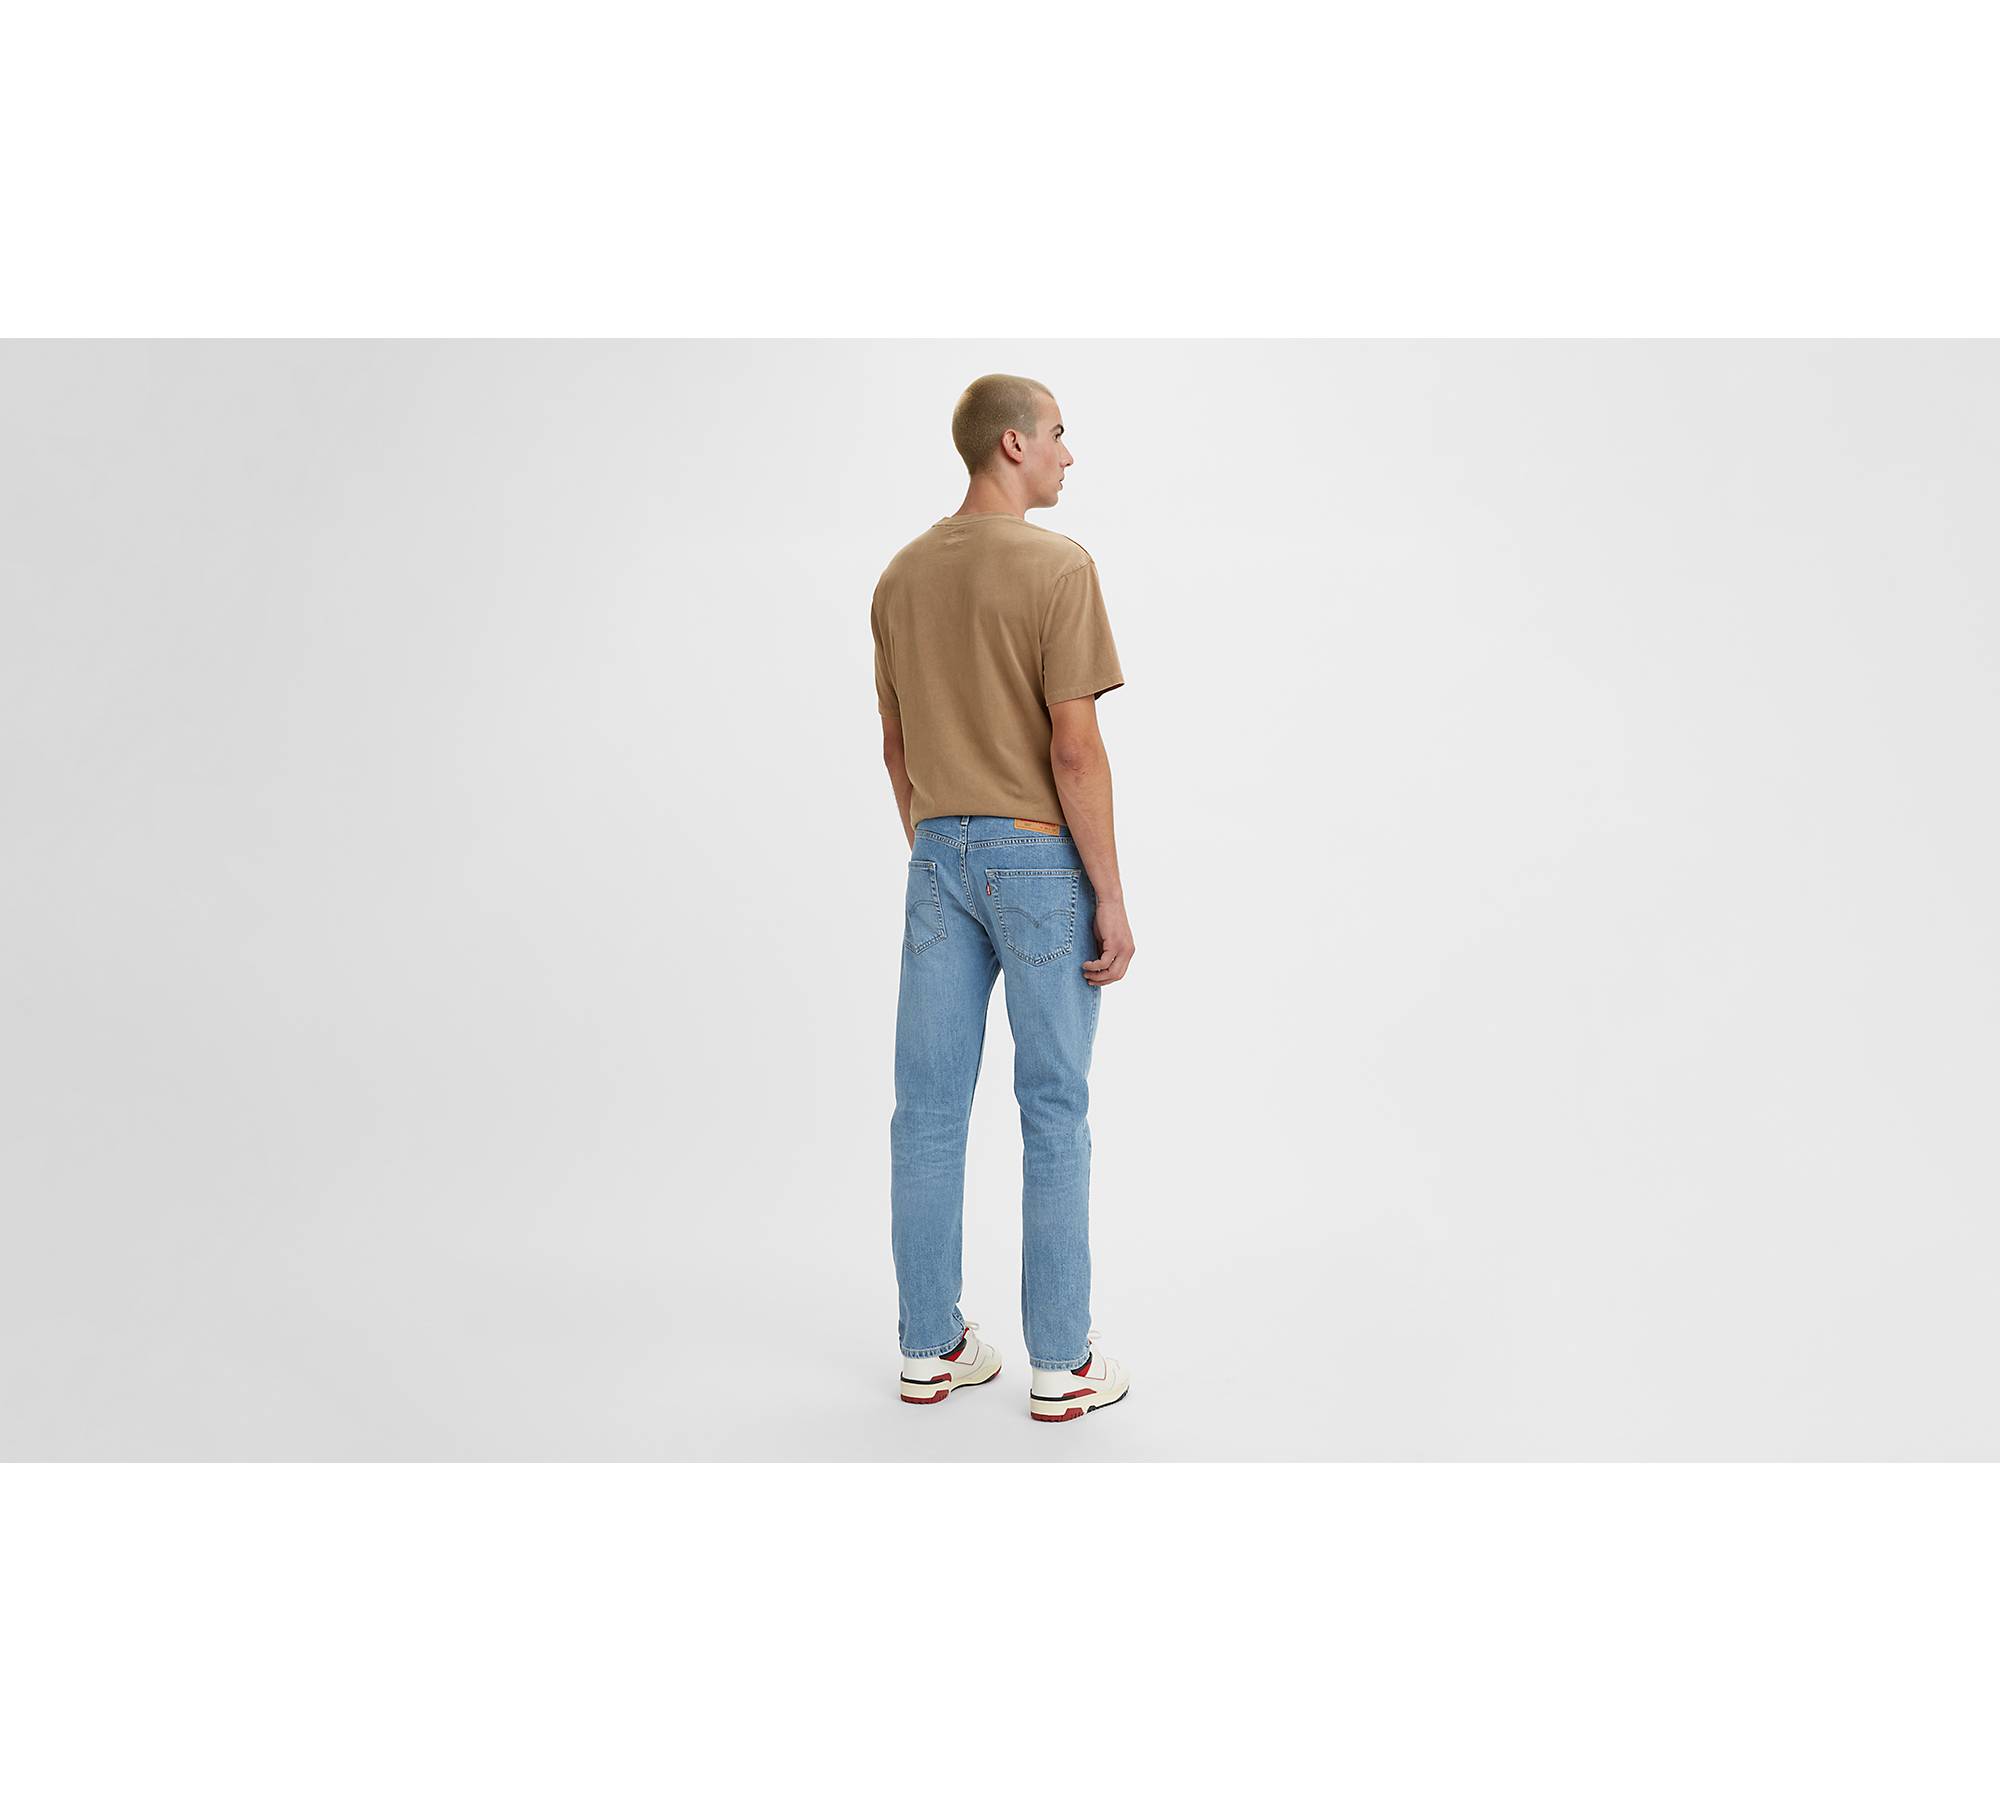 Levi's Men's 502 Taper Fit Jeans - Pauper Stone — Dave's New York